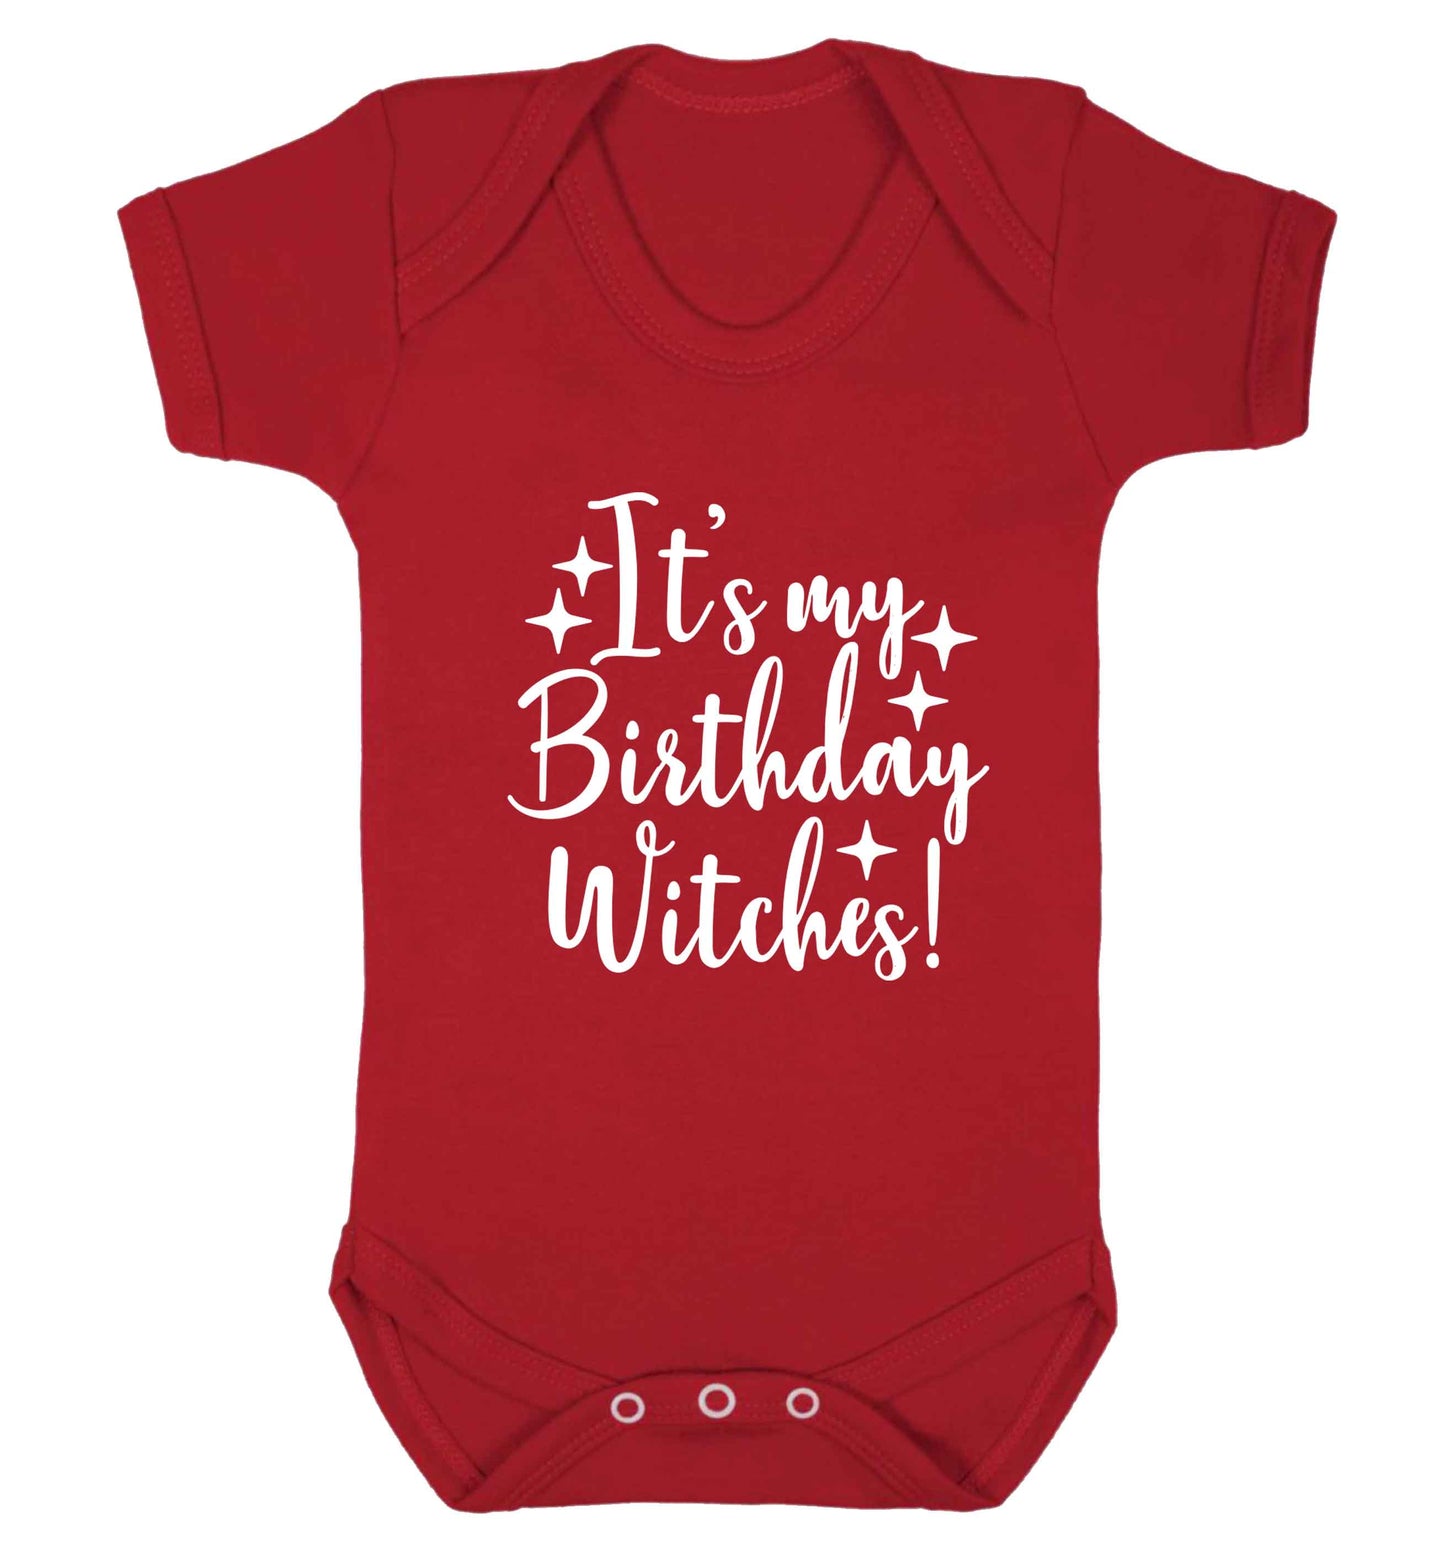 It's my birthday witches!baby vest red 18-24 months